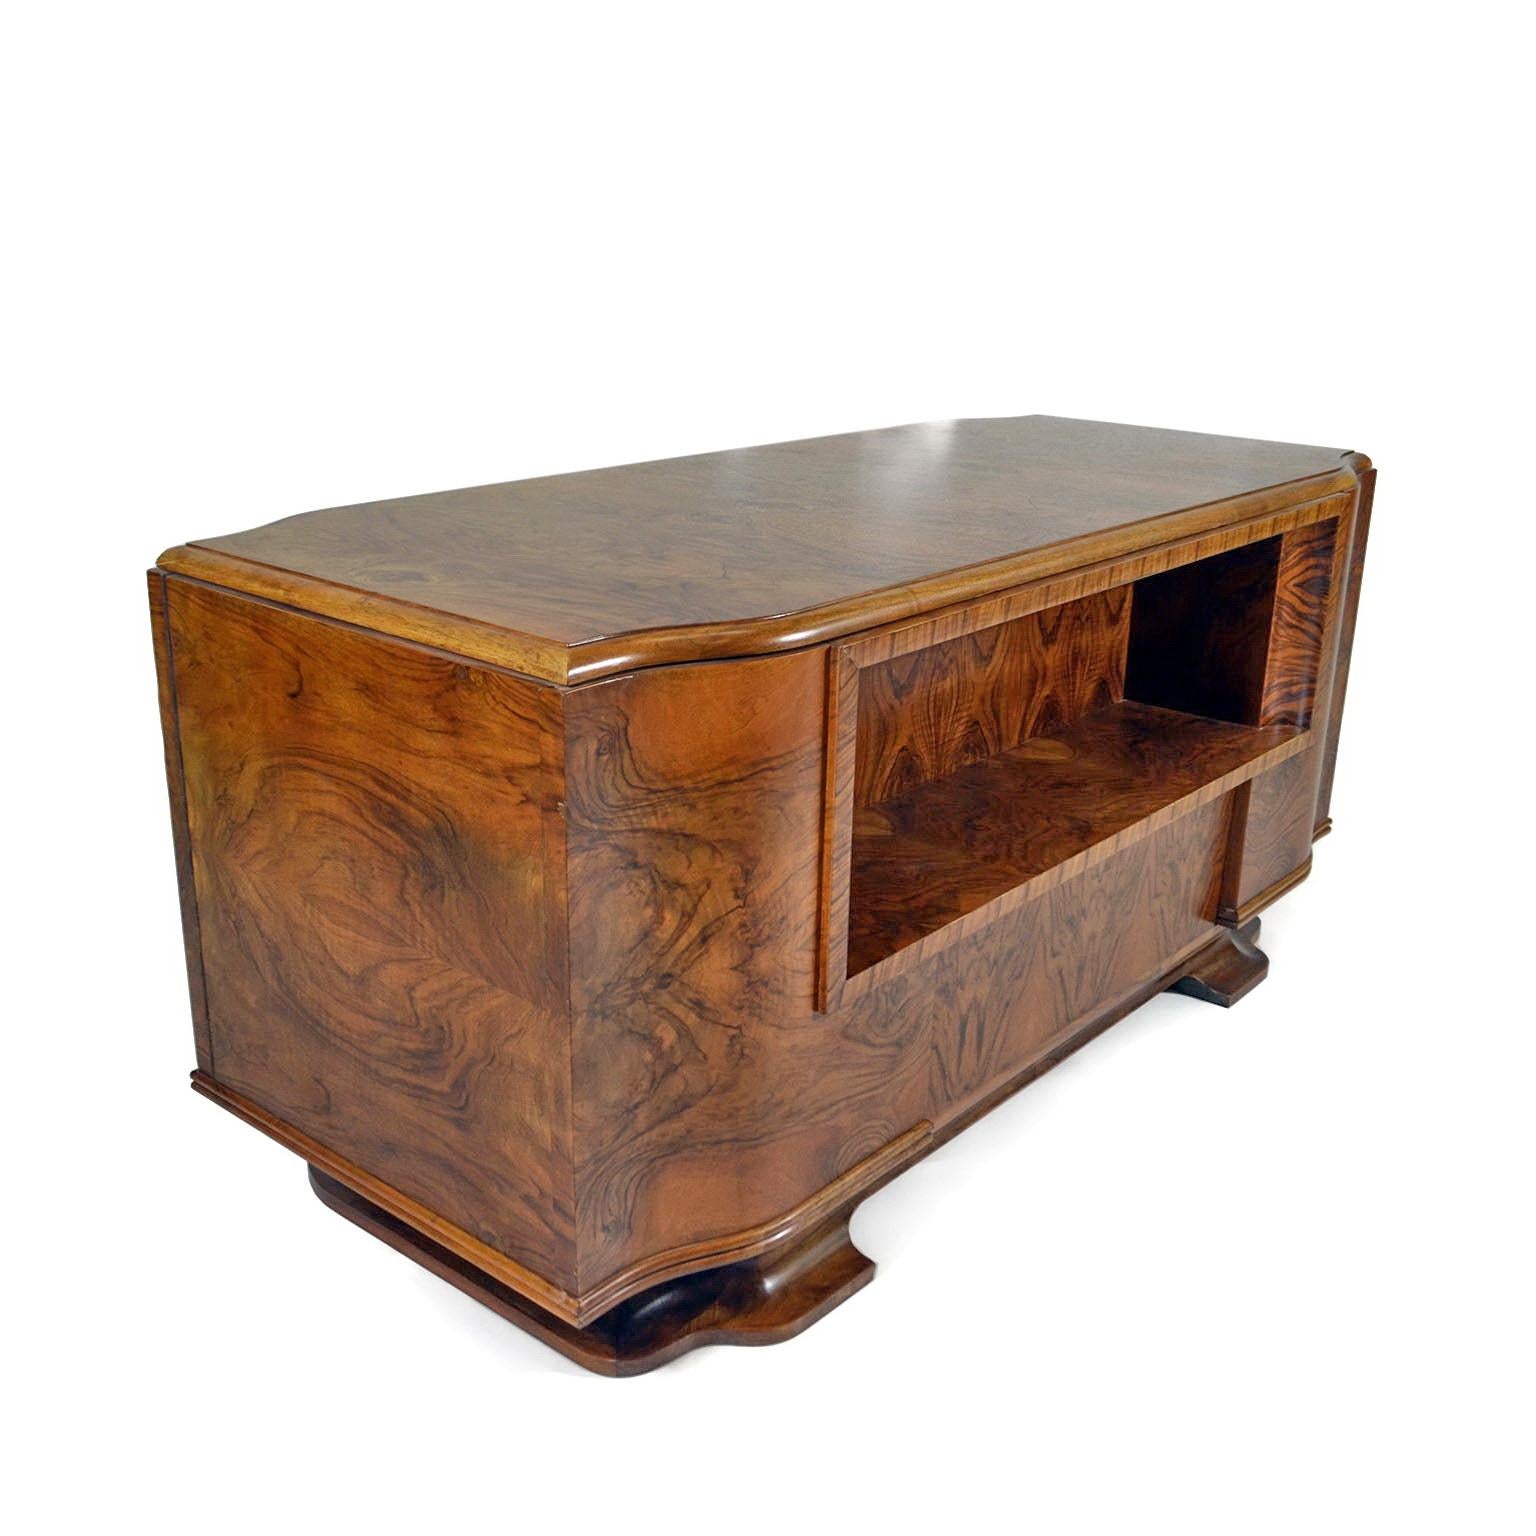 Stunning large Art Deco desk made of solid wood veneered in French walnut and mahogany, moved contour creating a slender look, yet a massive, impressive body, sitting on rounded feet. Beautiful front space to store books or decorative items,